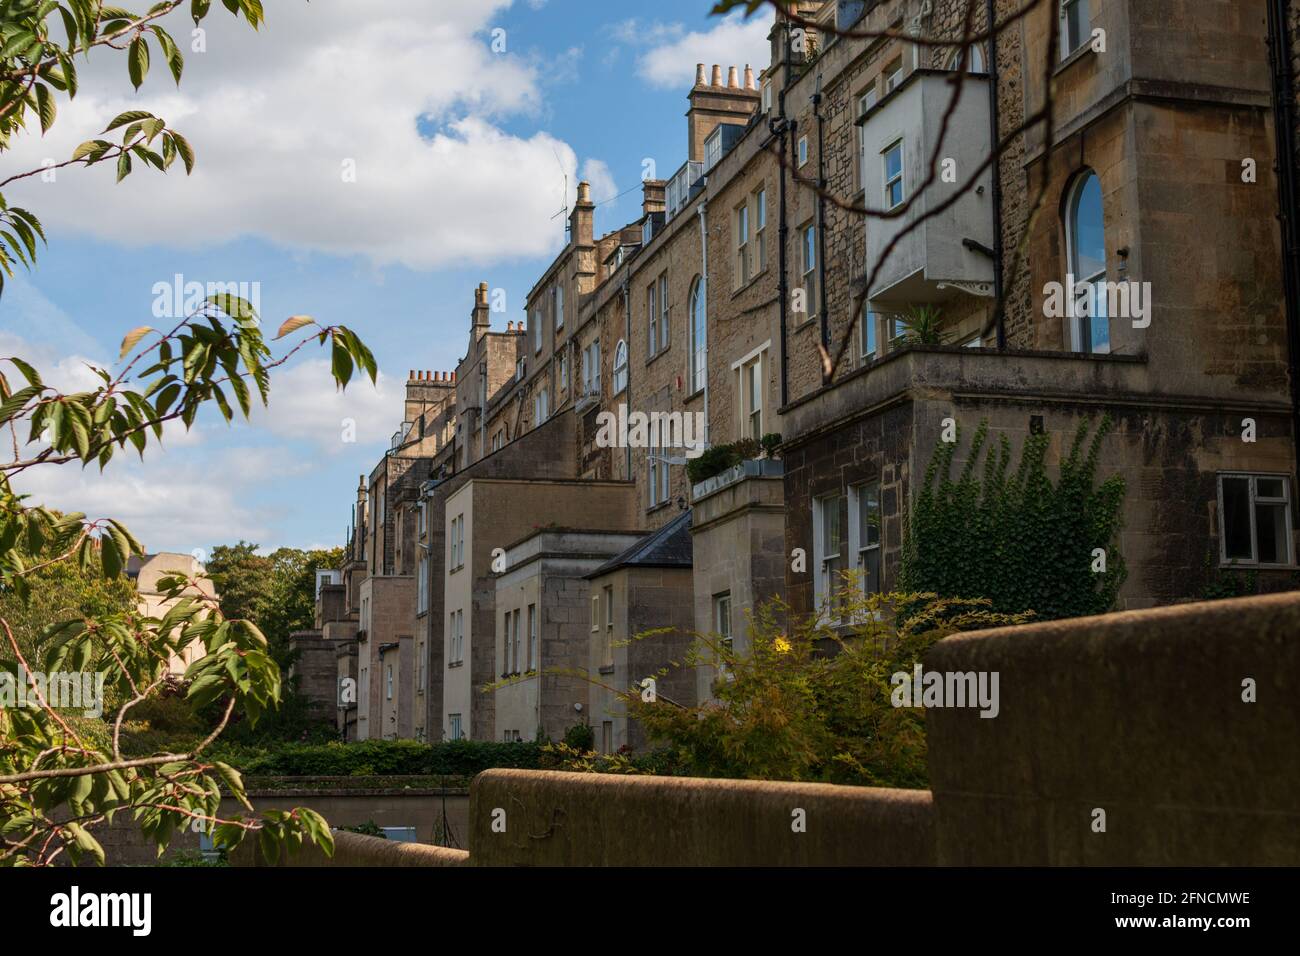 The back of a group of houses in the city of Bath, England. Stock Photo